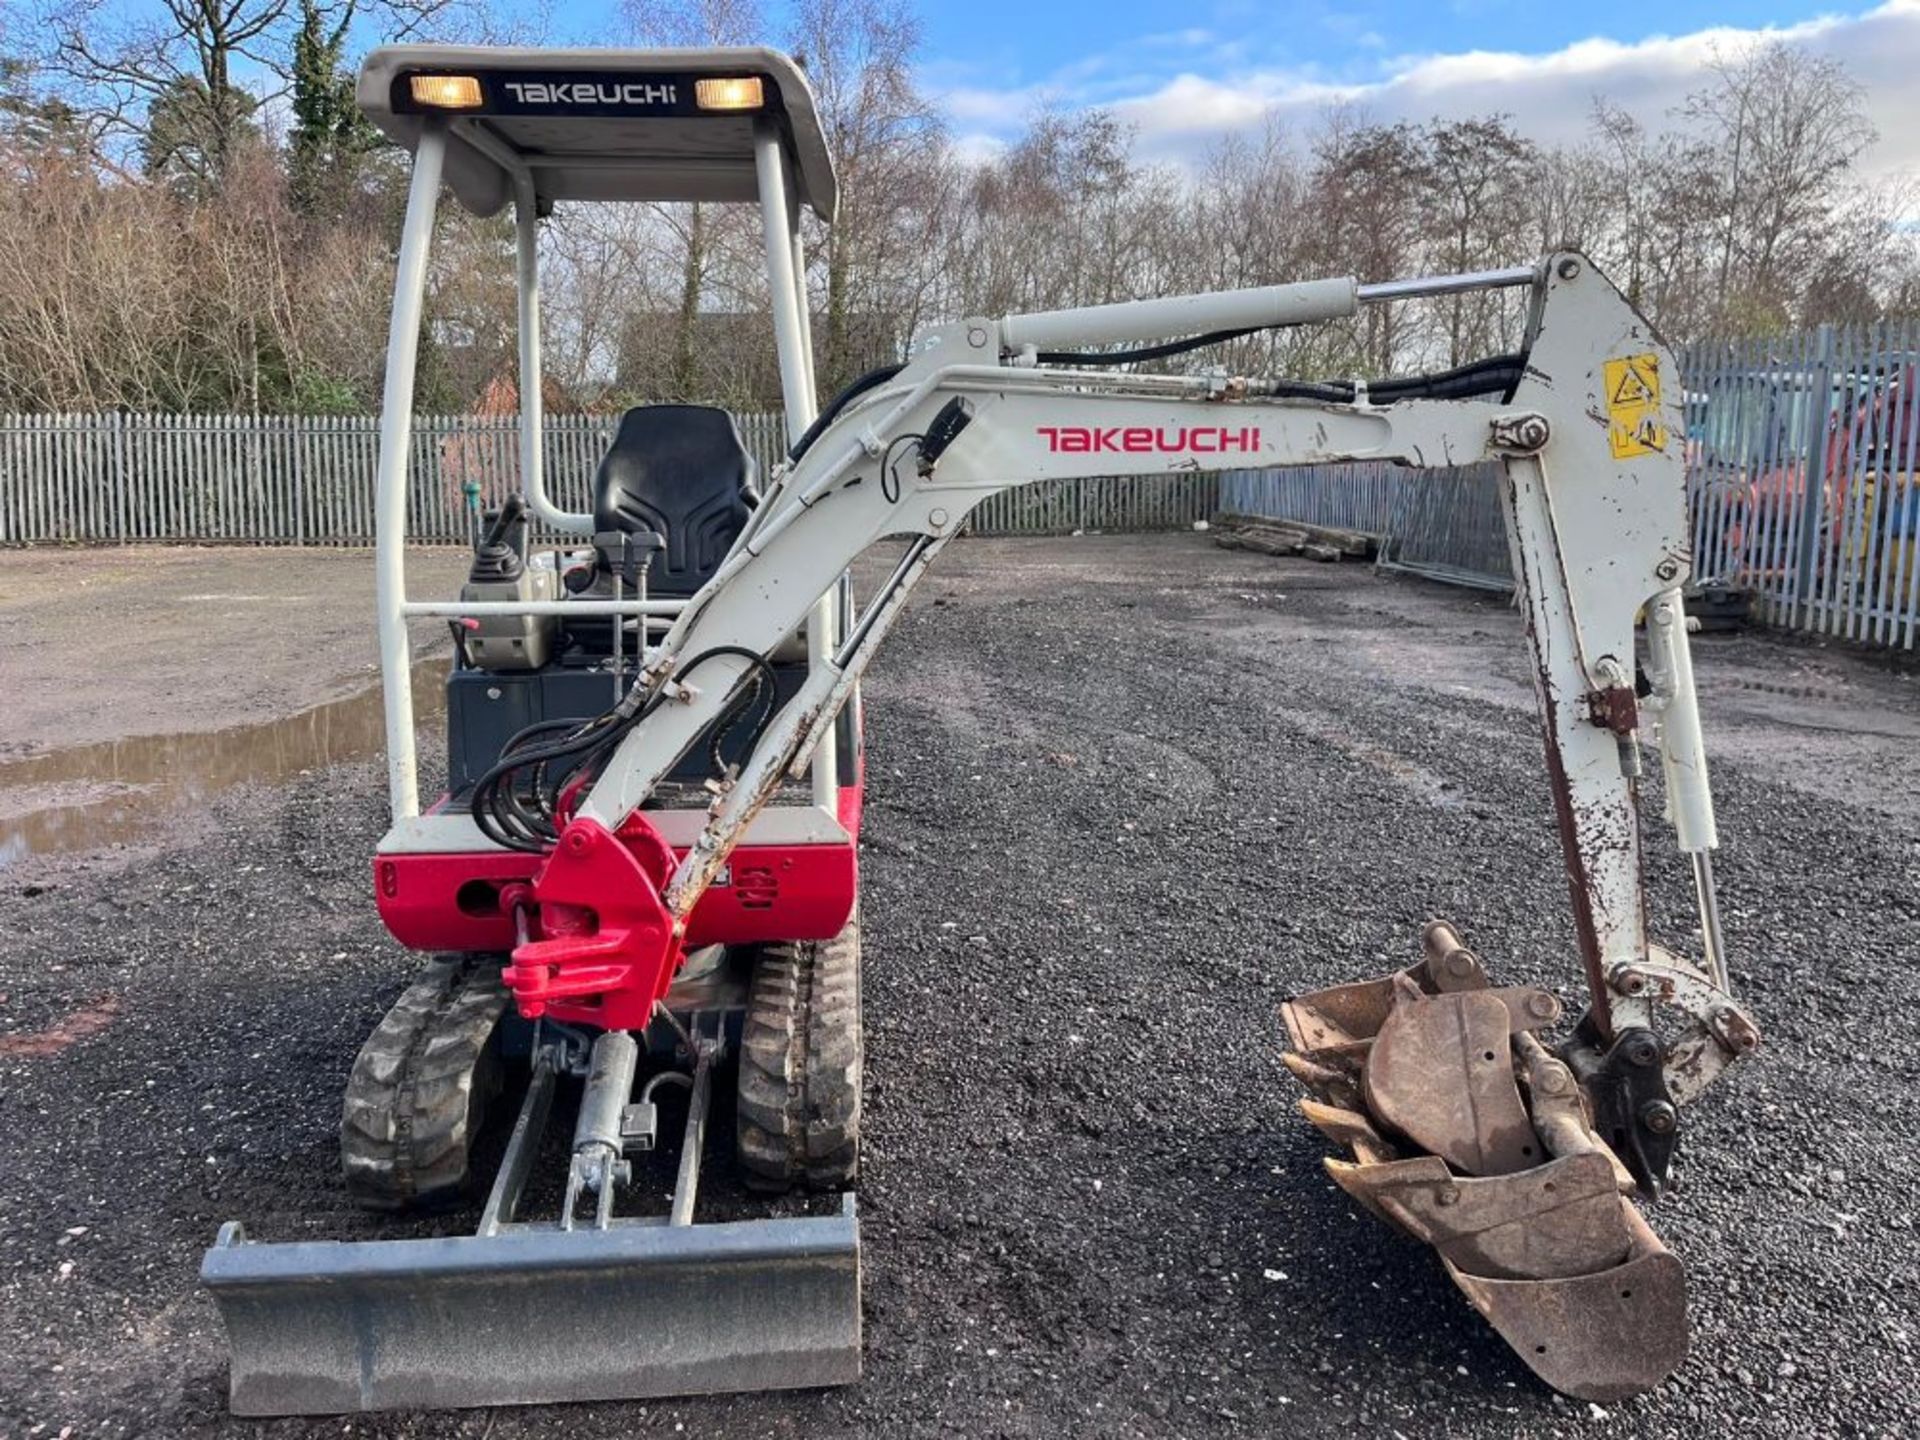 TAKEUCHI TB016 DIGGER 2014 2852HRS C.W QH 4 BUCKETS EXPANDING TRACKS 2 SPEED RTD - Image 3 of 12